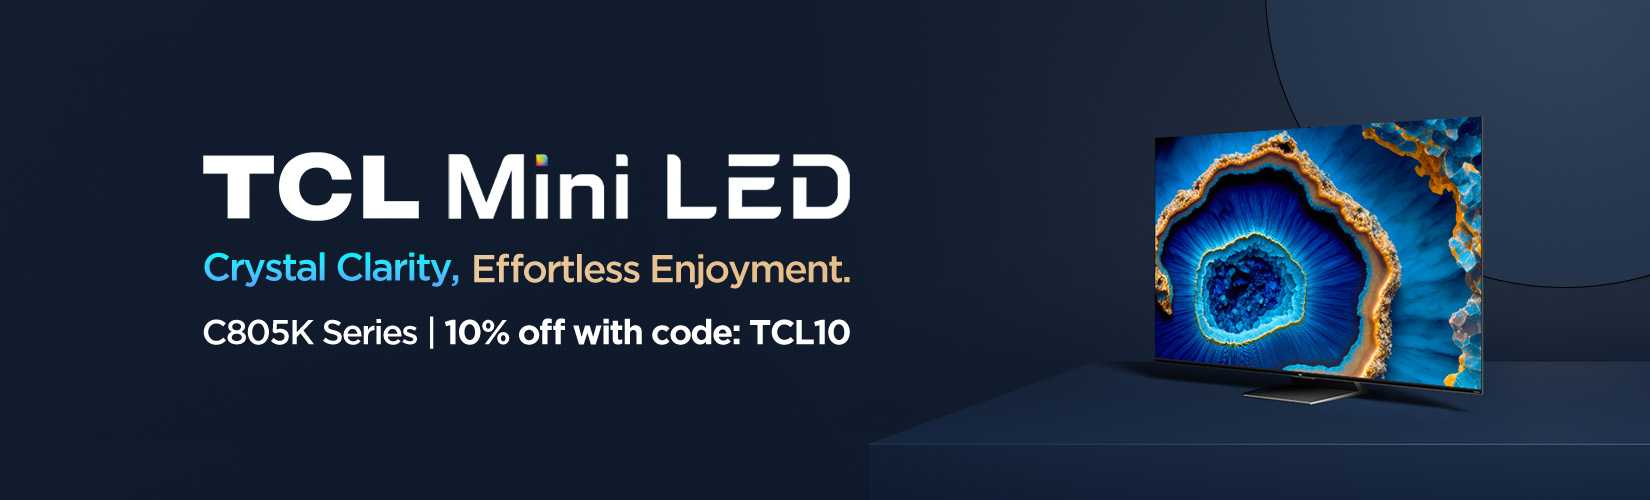 TCL Mini LED. Crystal Clarity. Effortless Enjoyment. C805K Series. 10% off with code: TCL10